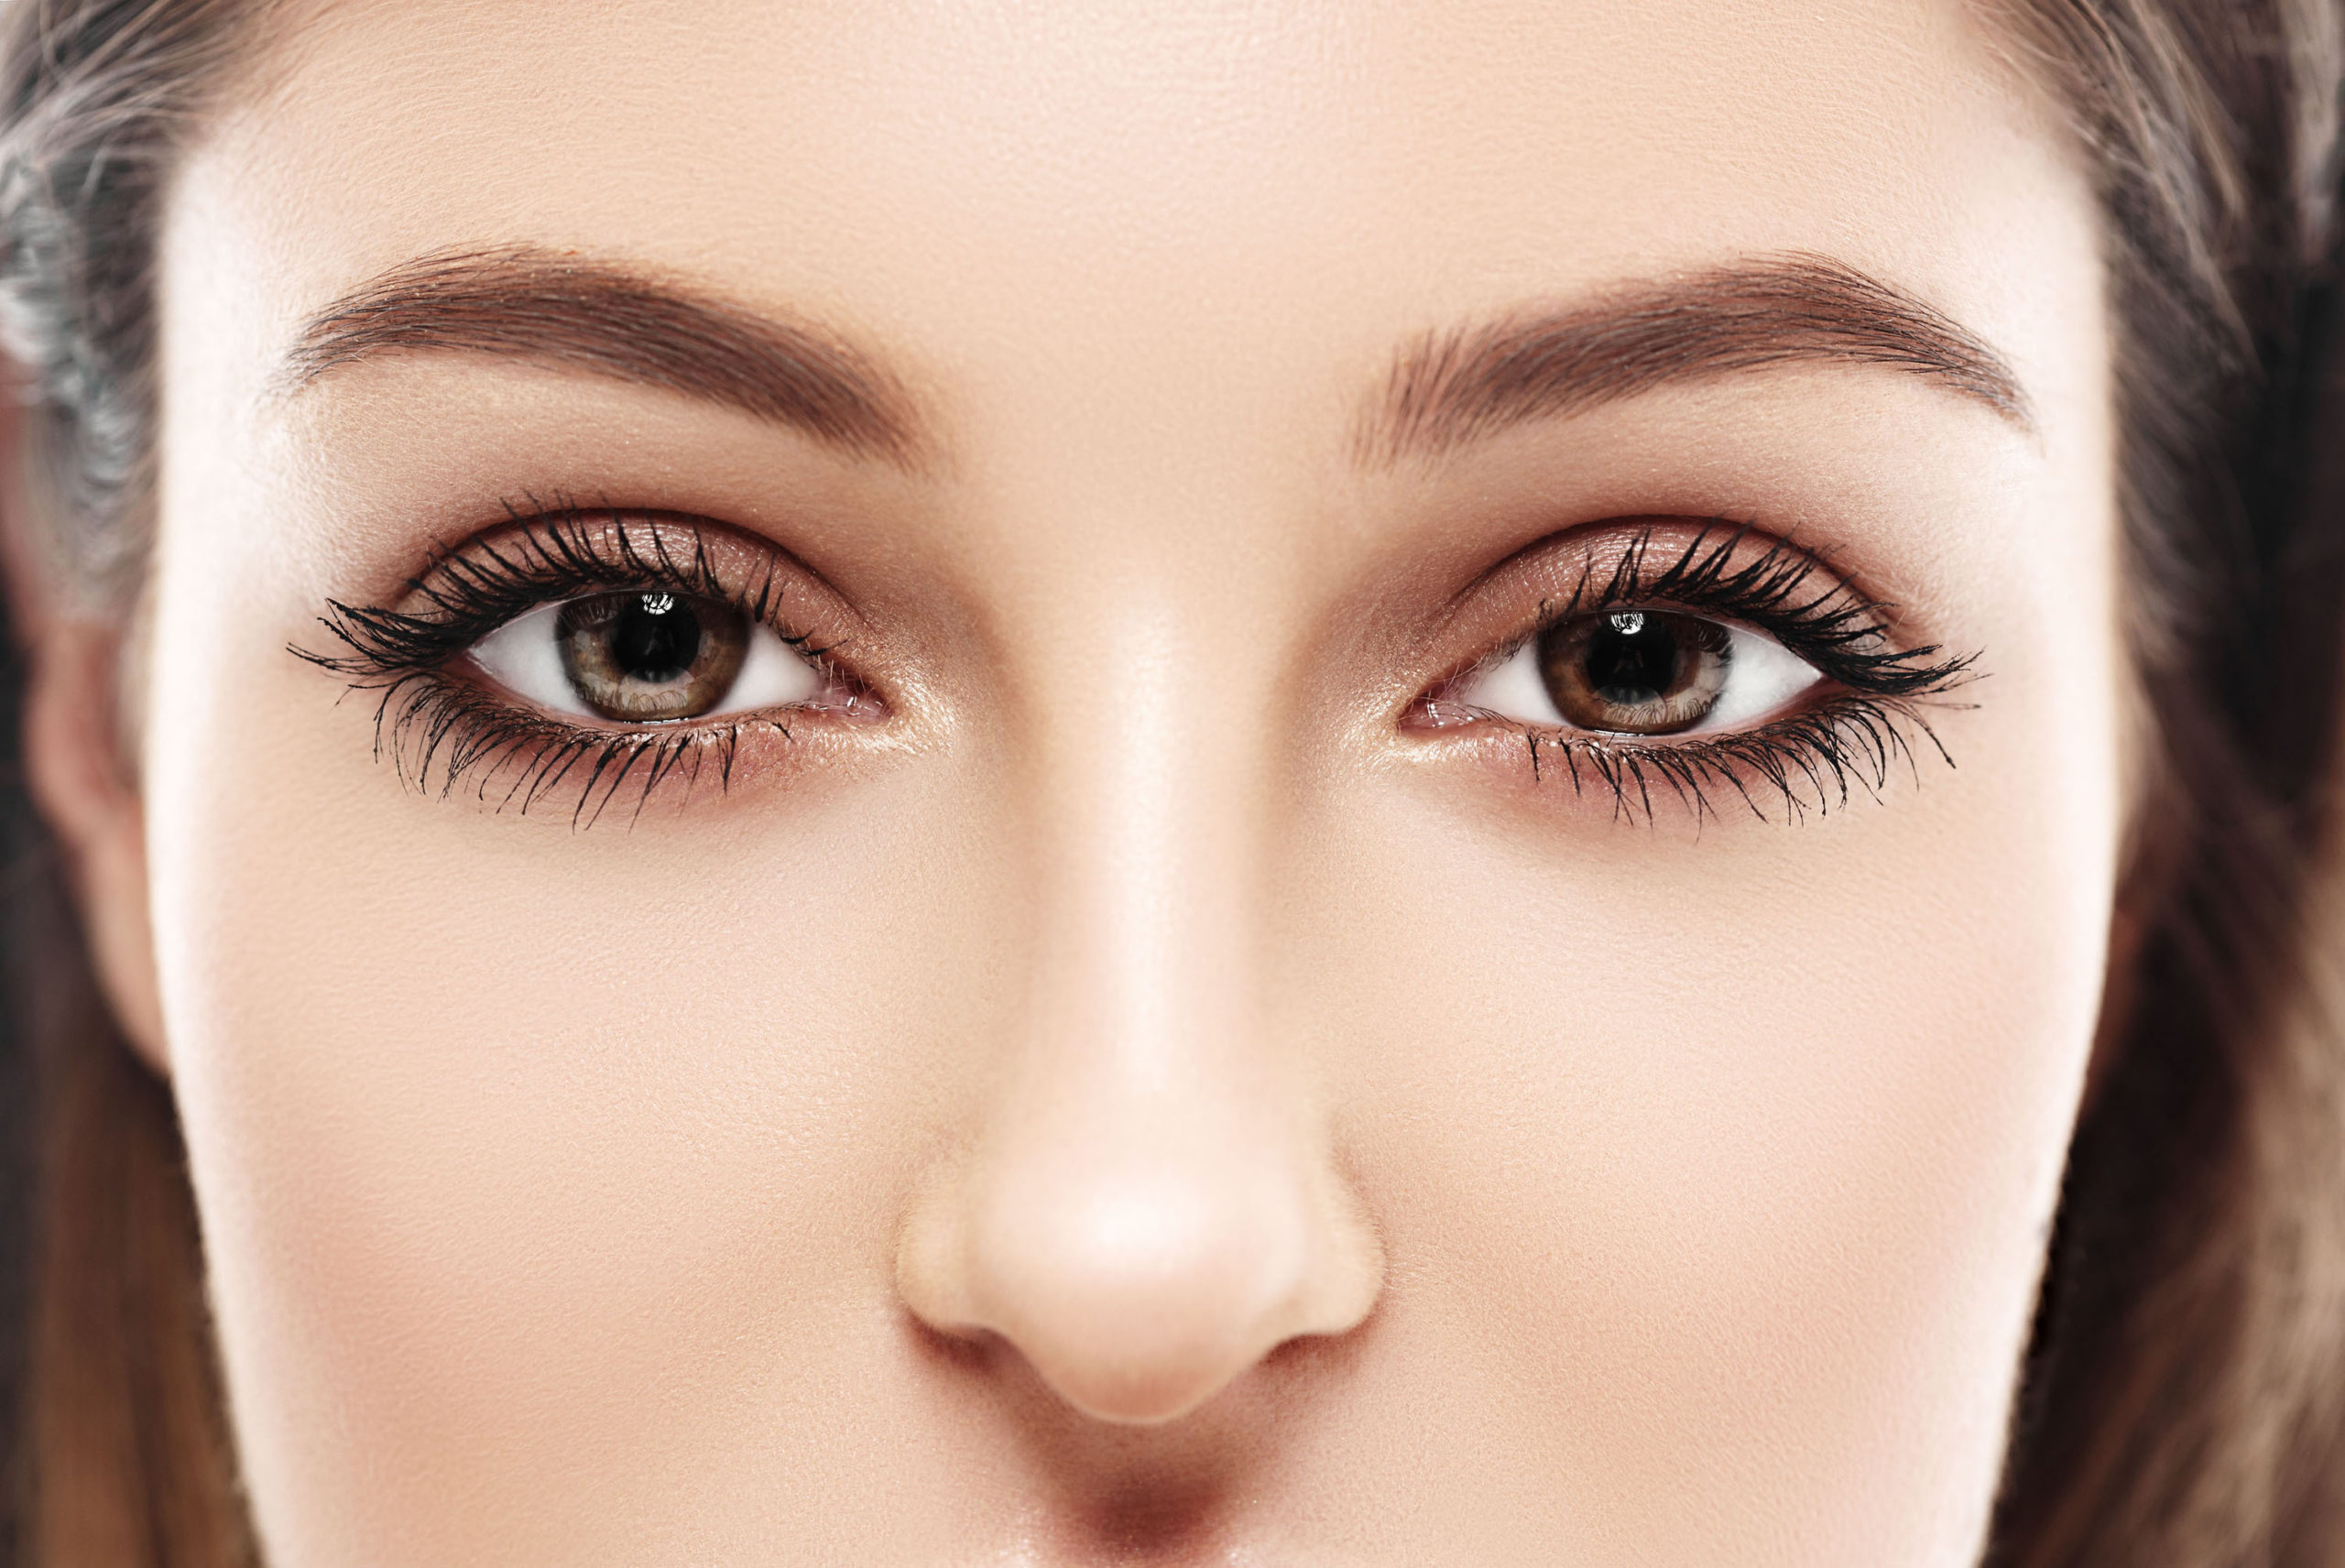 Endoscopic brow lift Beverly Hills CA